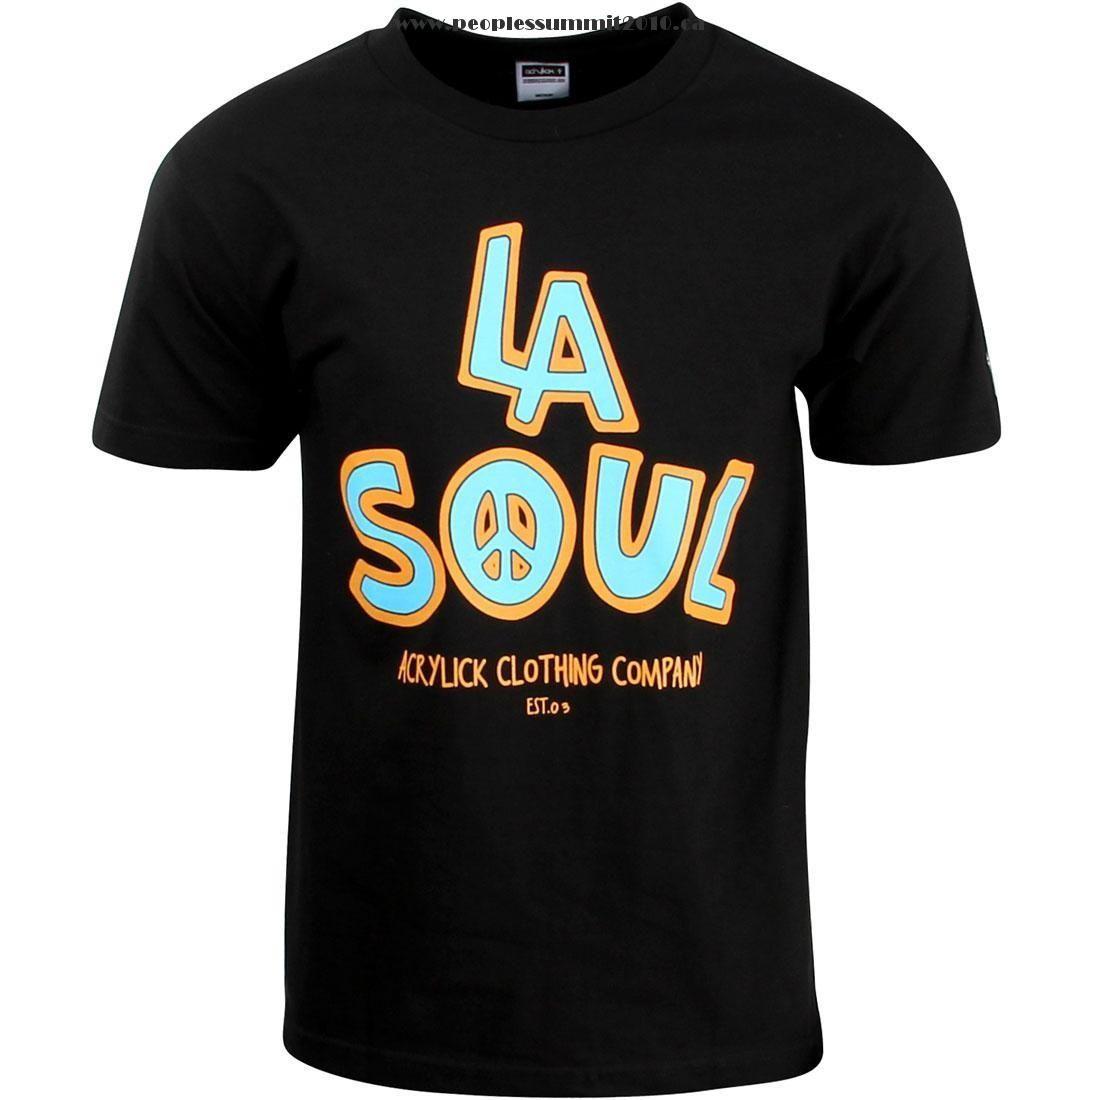 Acrylick Clothing Logo - Canada outlet online Acrylick LA Soul Tee (black) price